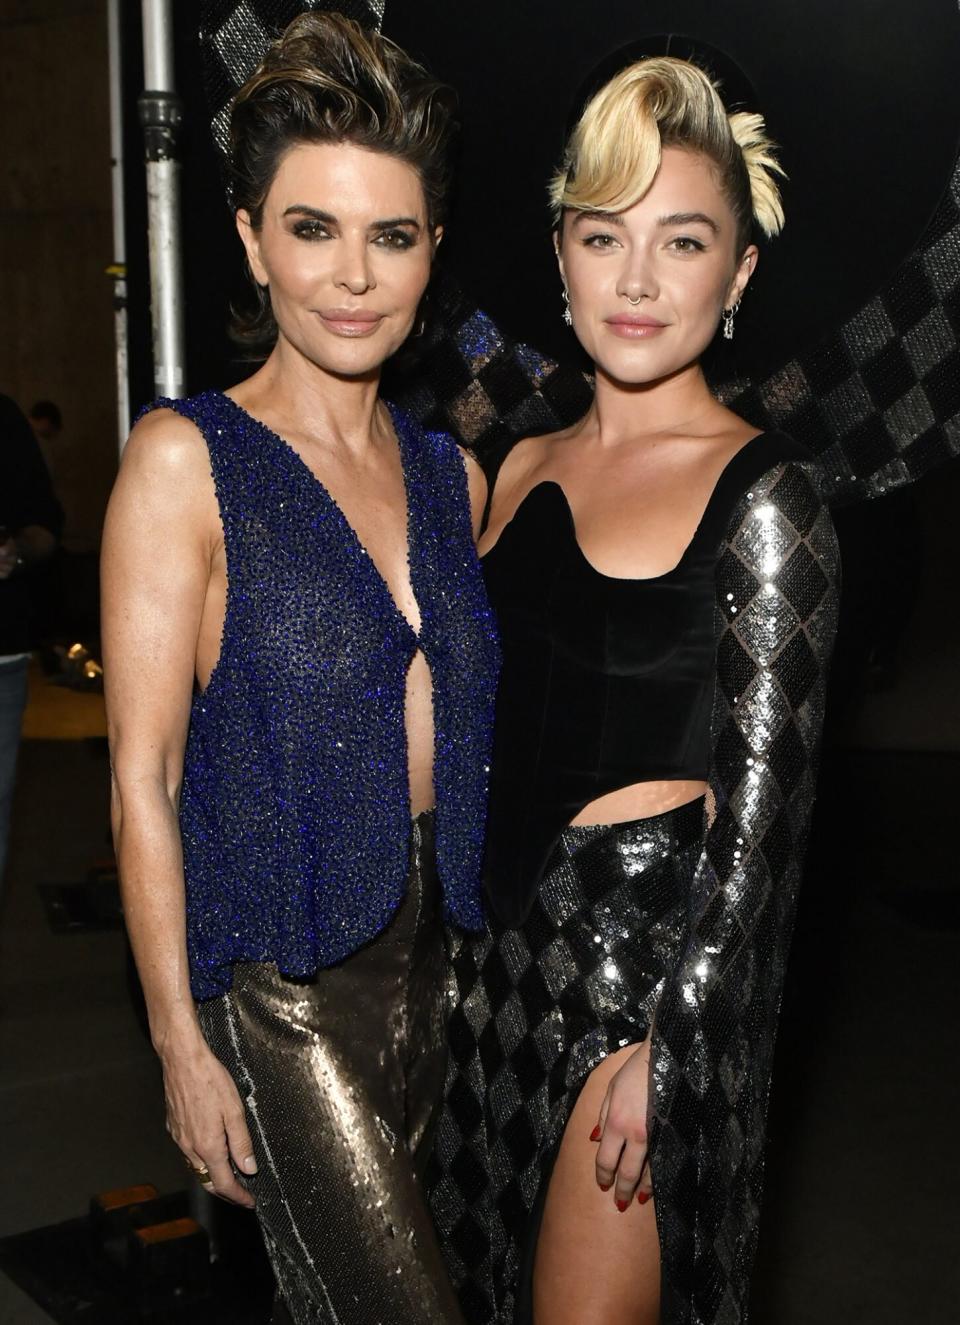 Lisa Rinna and Florence Pugh attend the Harris Reed show